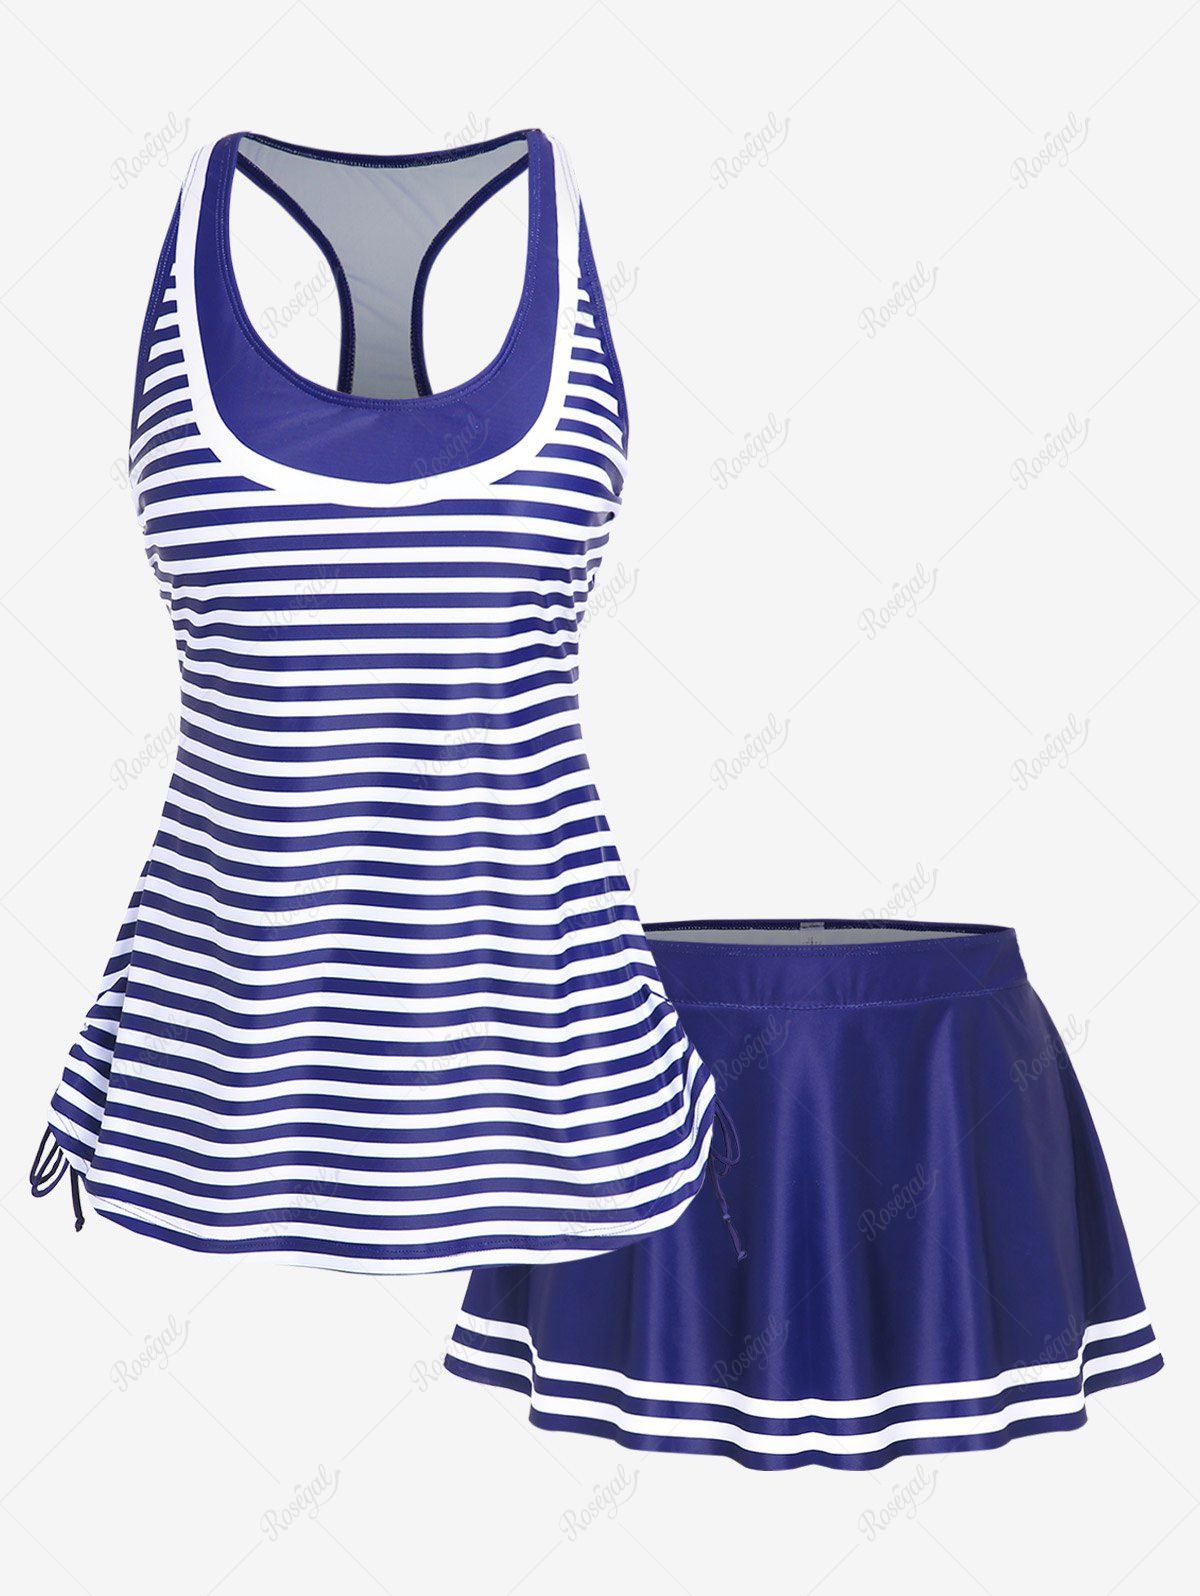 Trendy Plus Size Racerback Stripes Cinched Ruched Padded Skort Tankini Swimsuit  